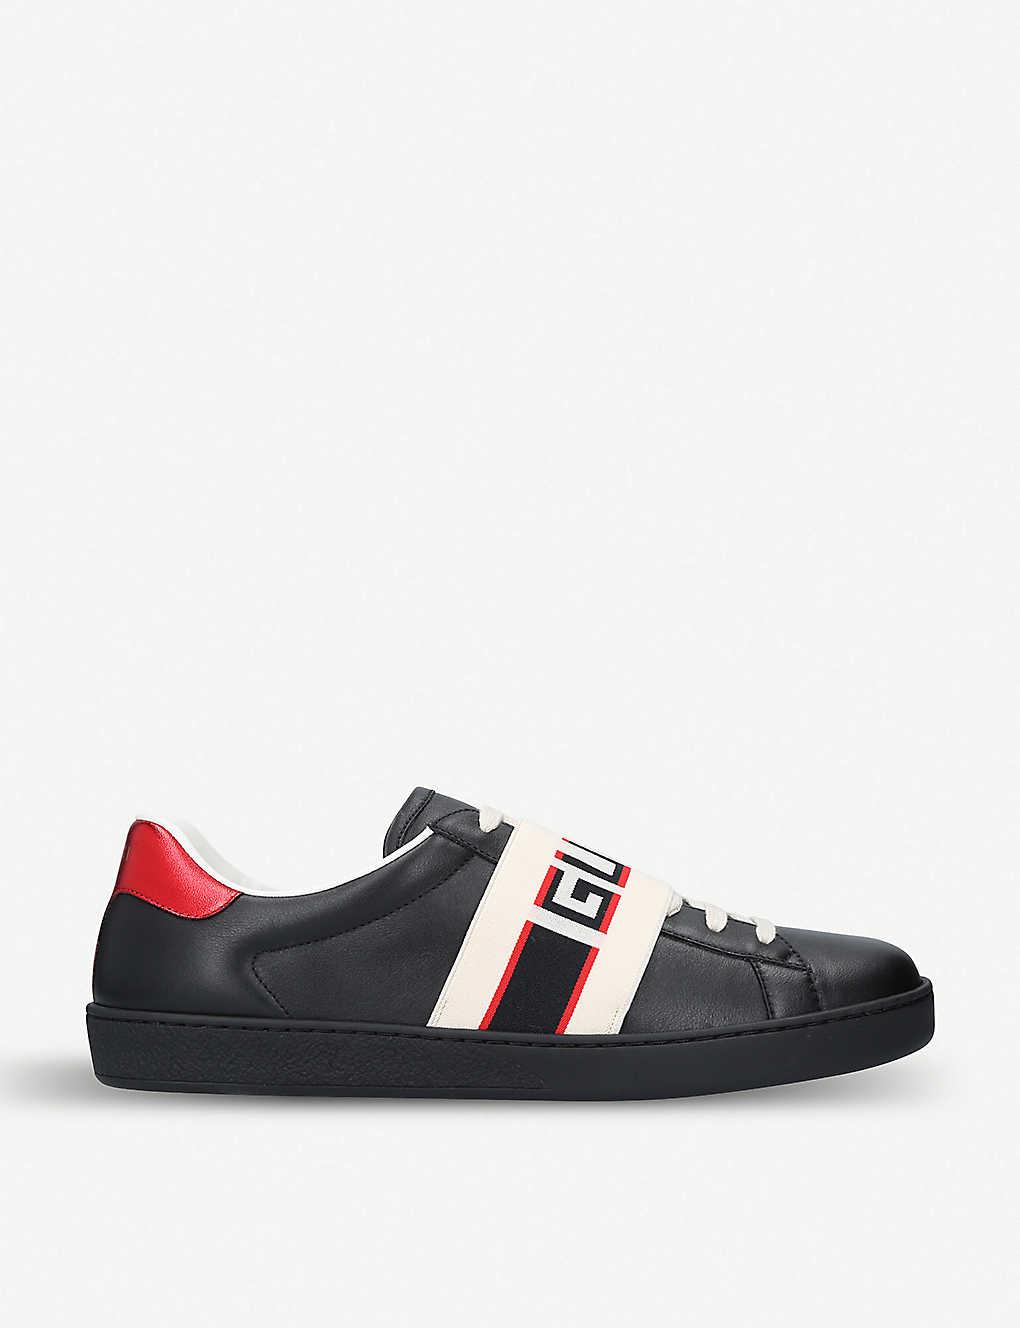 gucci shoes with stripe